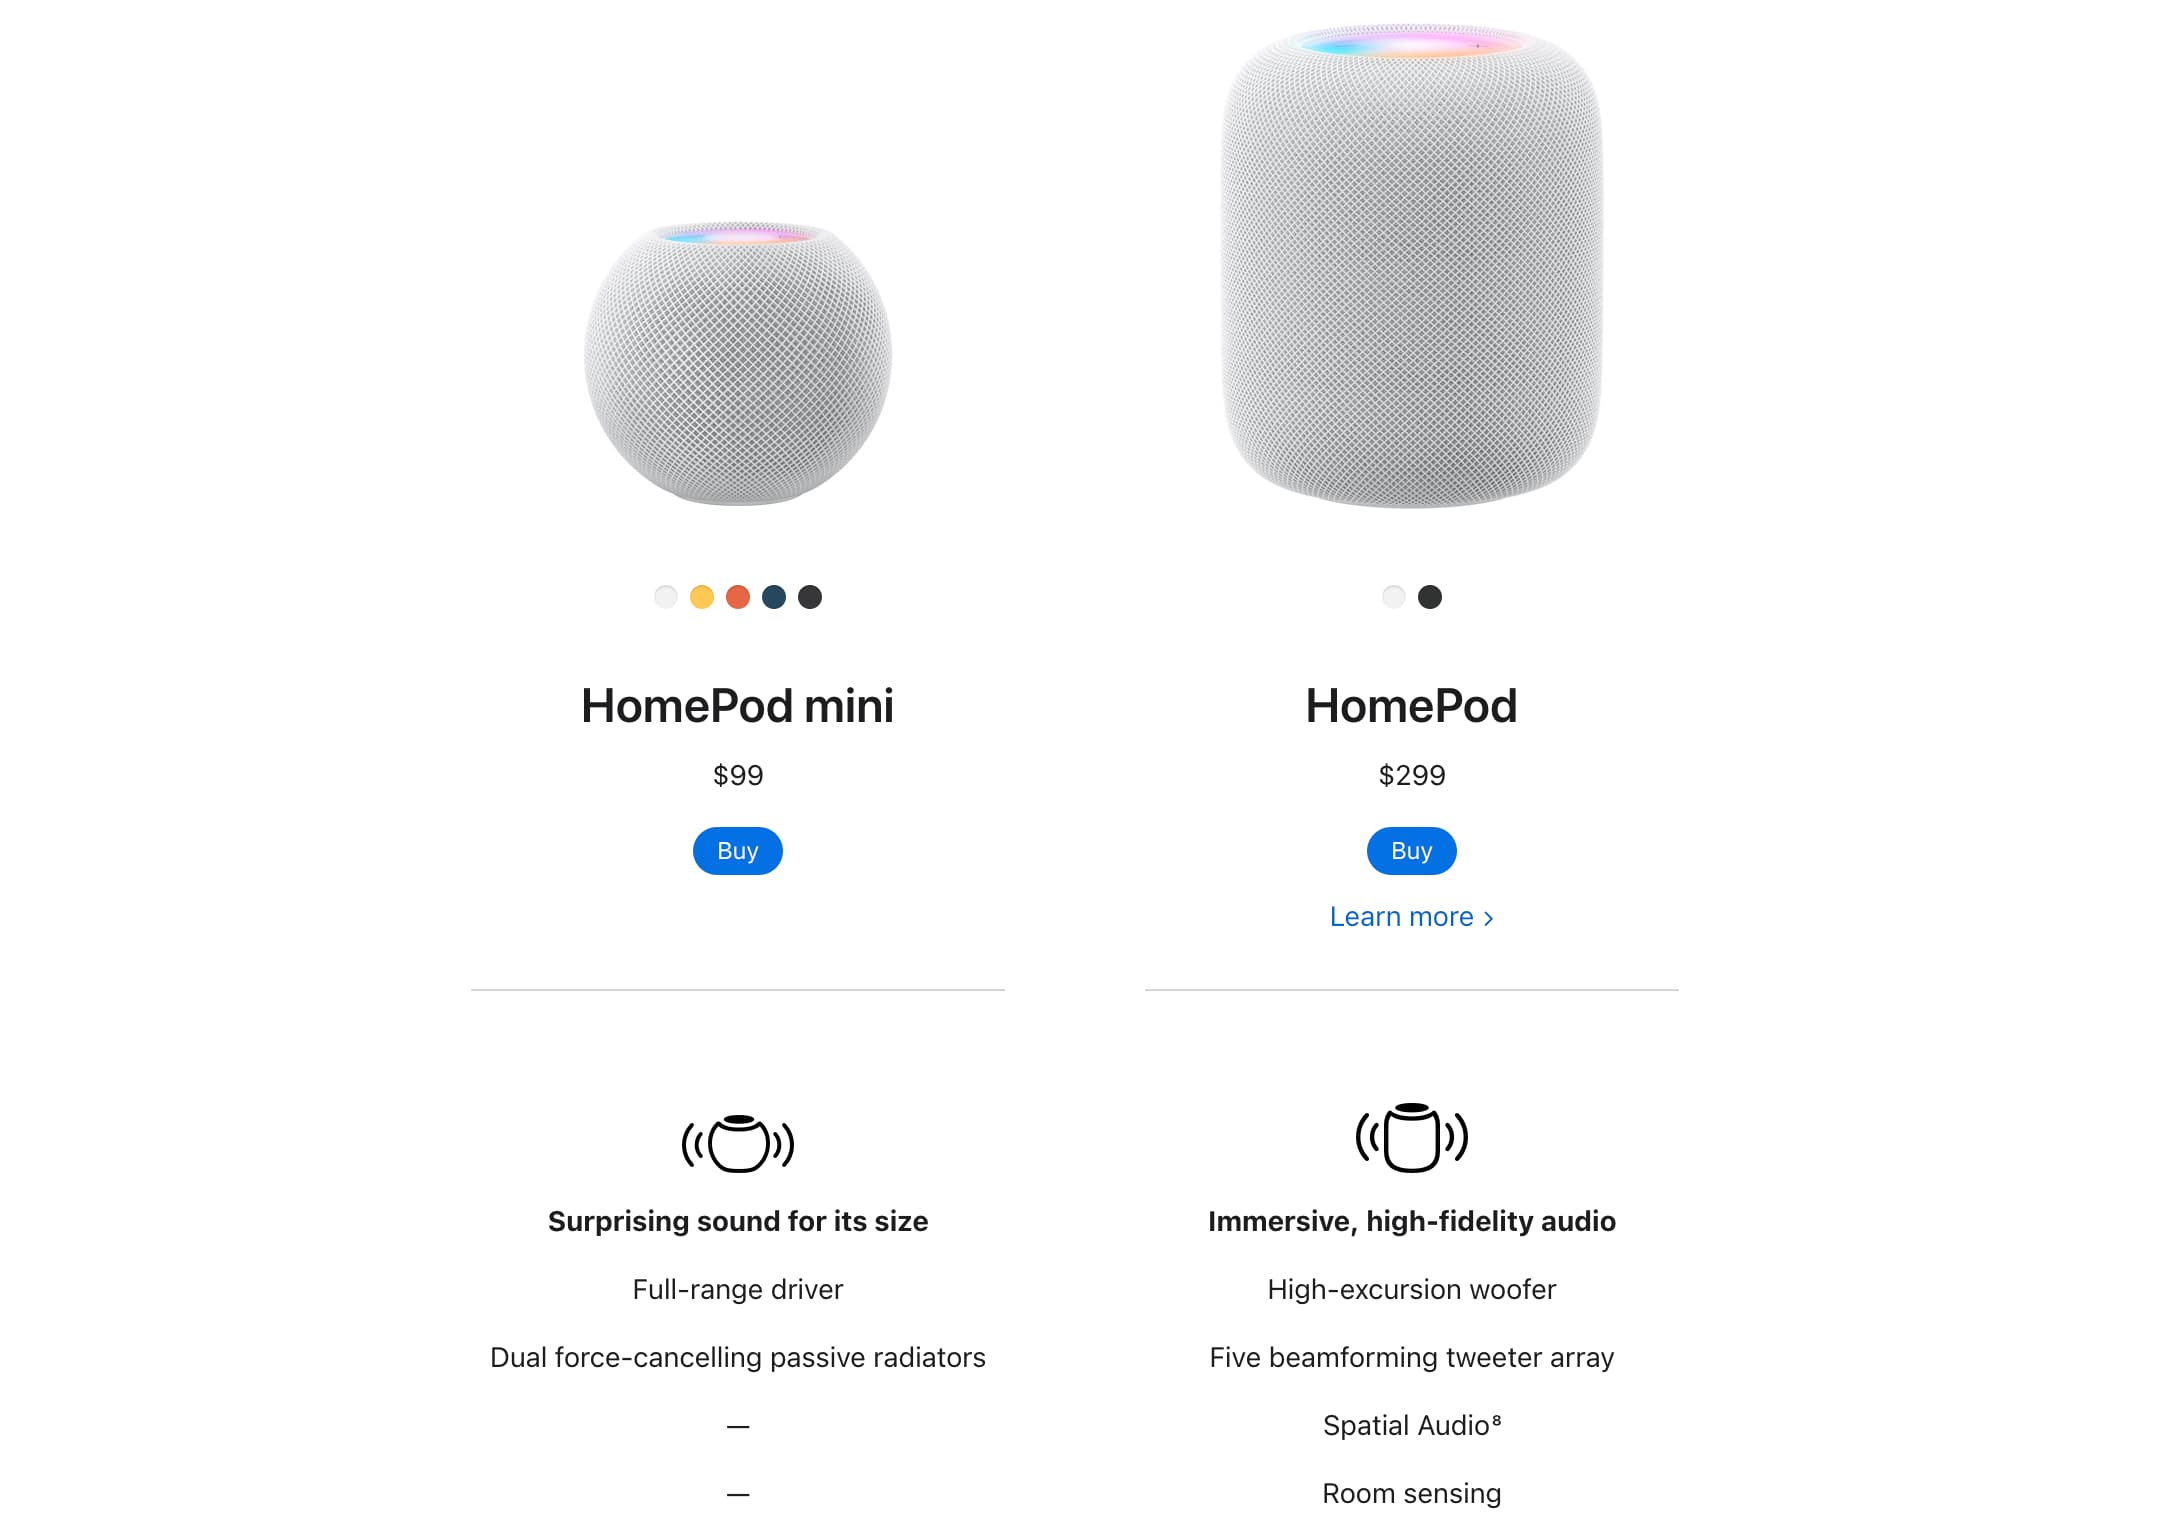 HomePod mini and HomePod differences